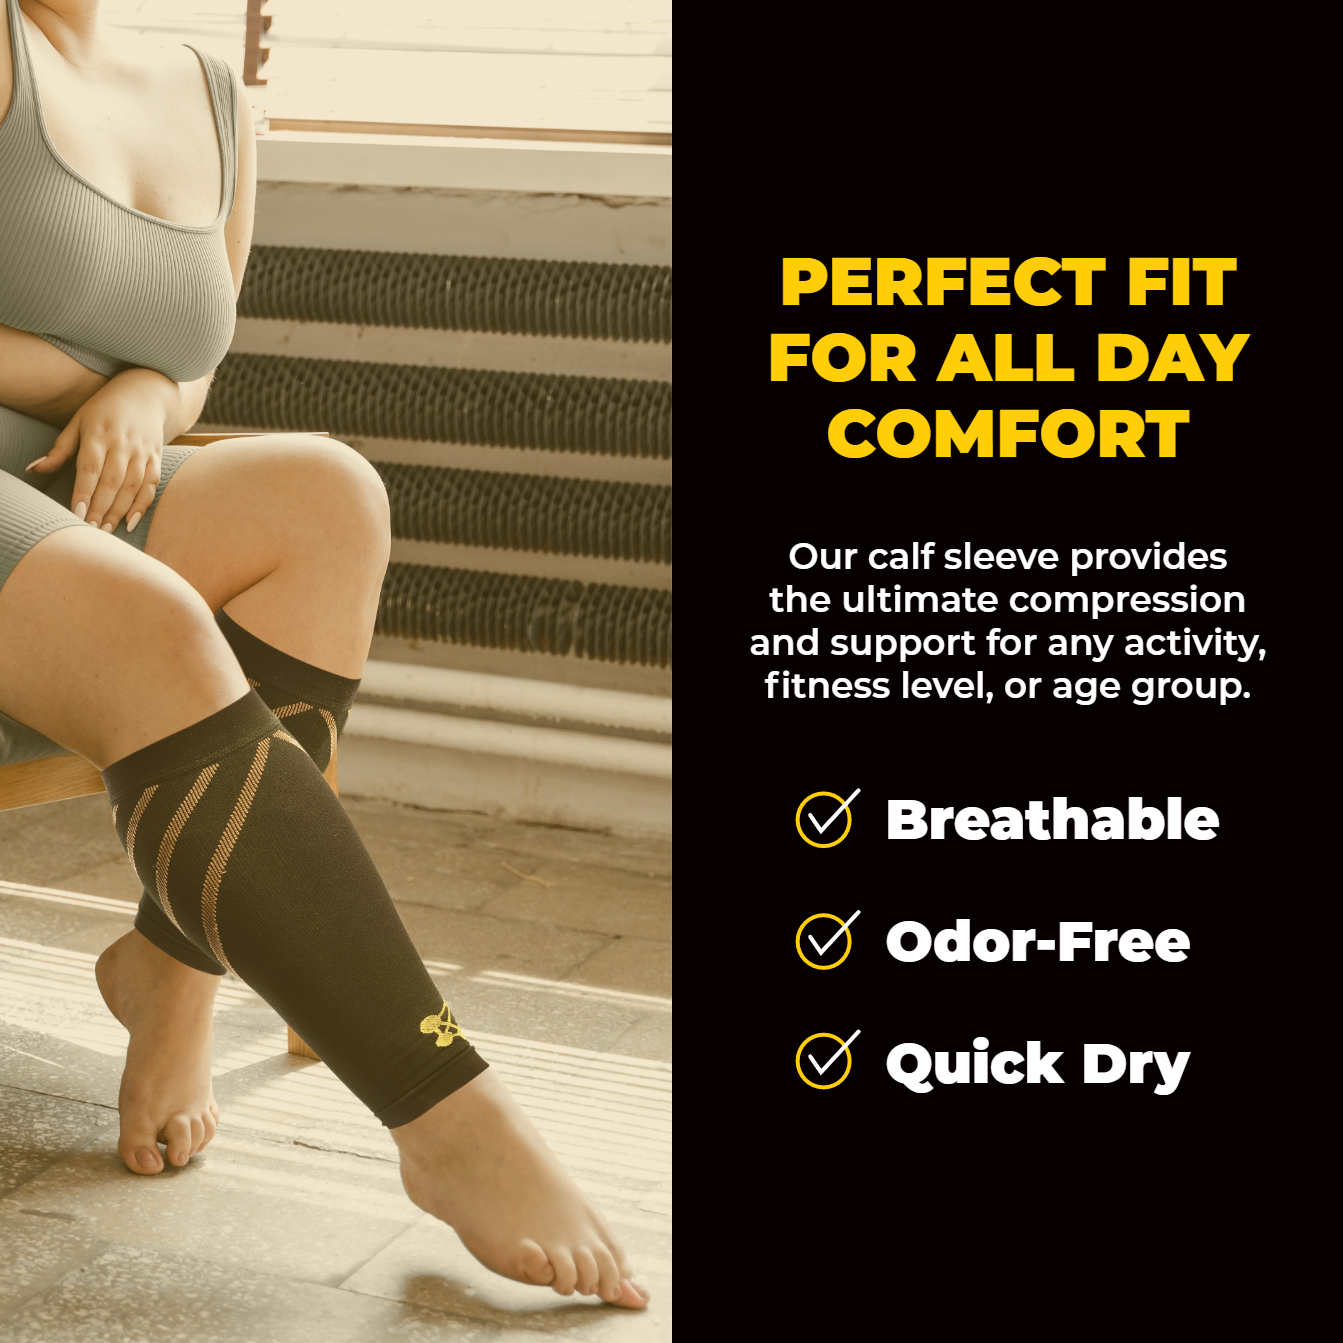 New Wide Calf Compression Sleeve For Men Provides Great Calf Support For People With Calf Injury